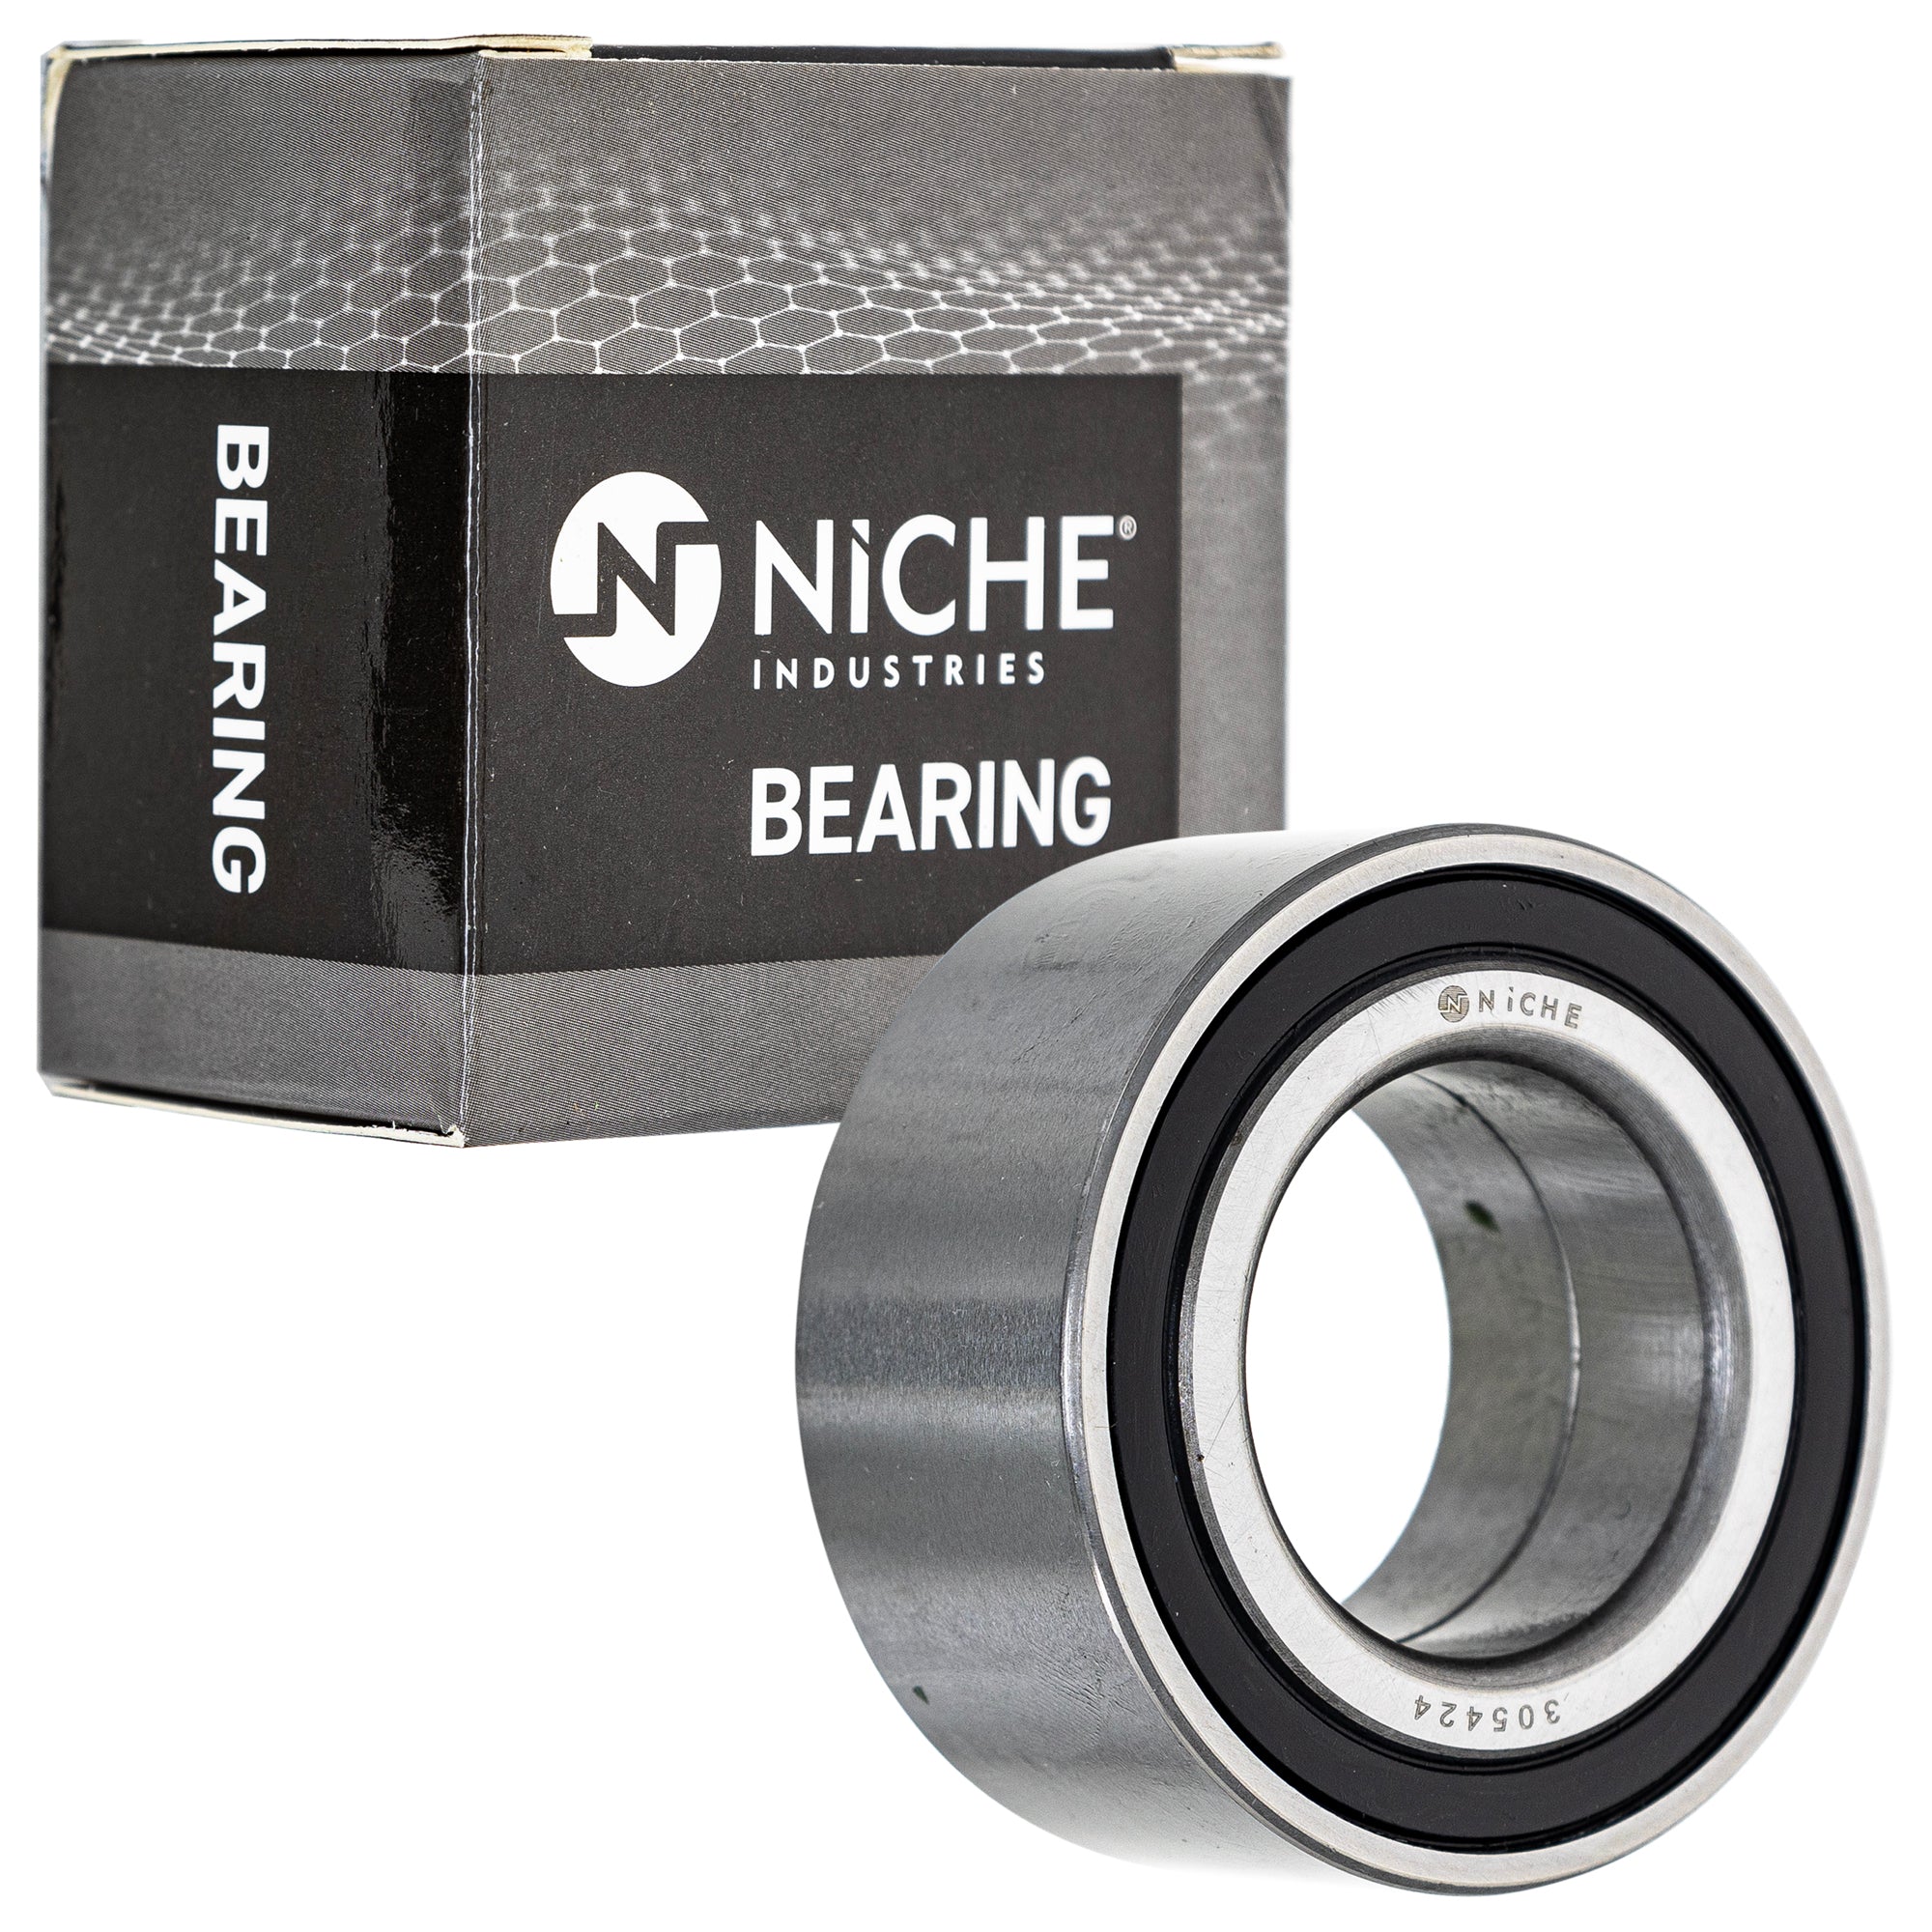 NICHE 519-CBB2255R Bearing & Seal Kit 2-Pack for zOTHER BRP Can-Am